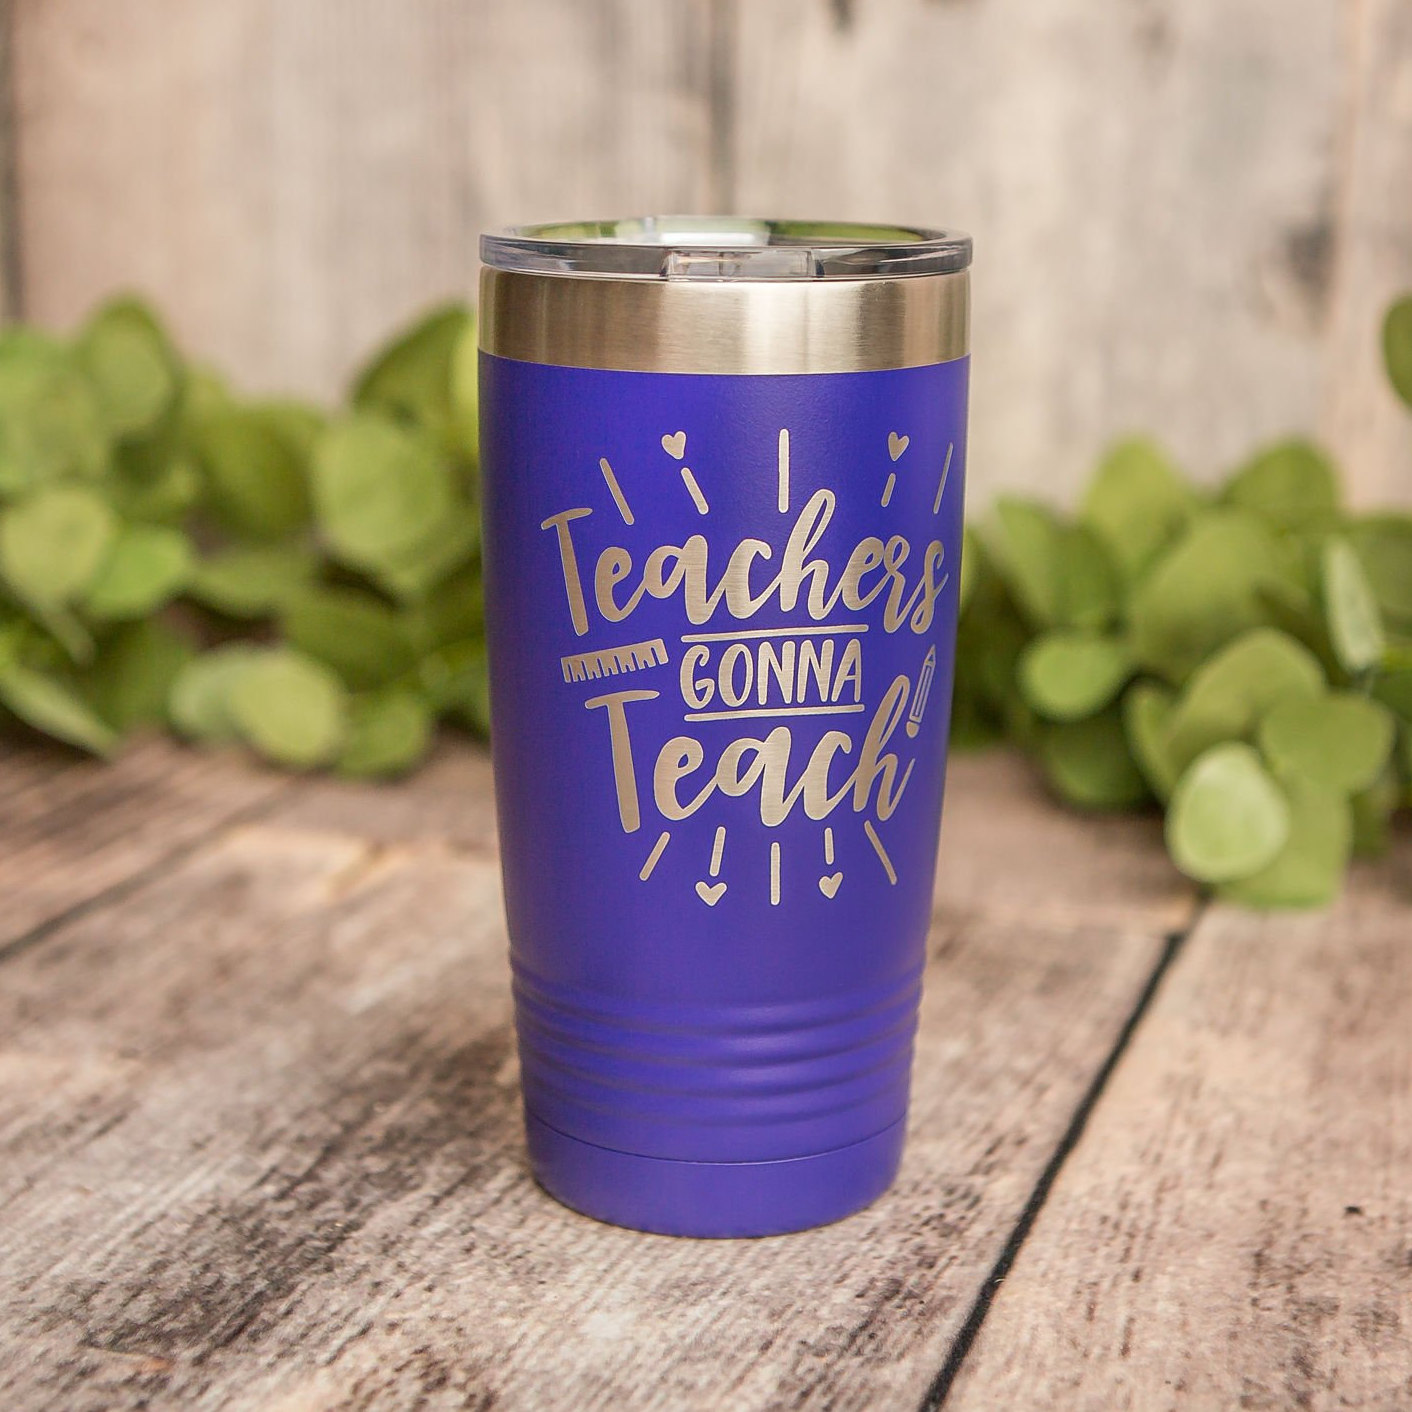 Don't Make Me Use My Teacher Voice Funny Tumbler - Stainless Steel